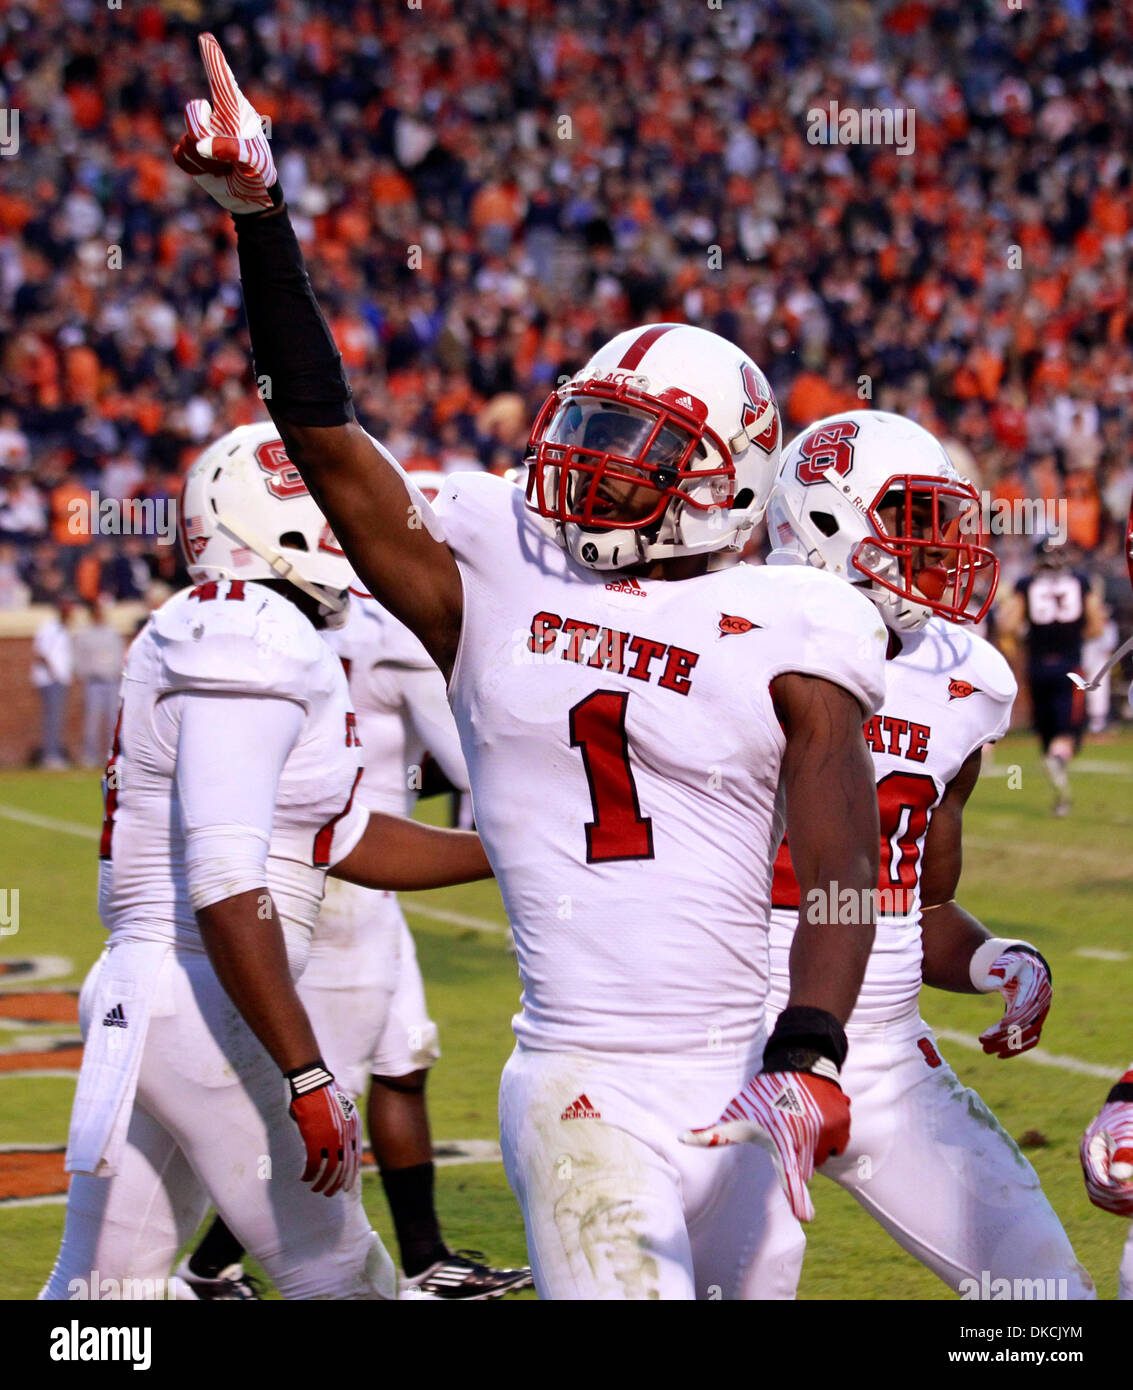 Oct. 22, 2011 - Charlottesville, Virginia, U.S. - North Carolina State Wolfpack cornerback DAVID AMERSON (1) celebrates a touchdown during an NCAA football game against the Virginia Cavaliers at the Scott Stadium. NC State defeated Virginia 28-14 (Credit Image: © Andrew Shurtleff/ZUMAPRESS.com) Stock Photo